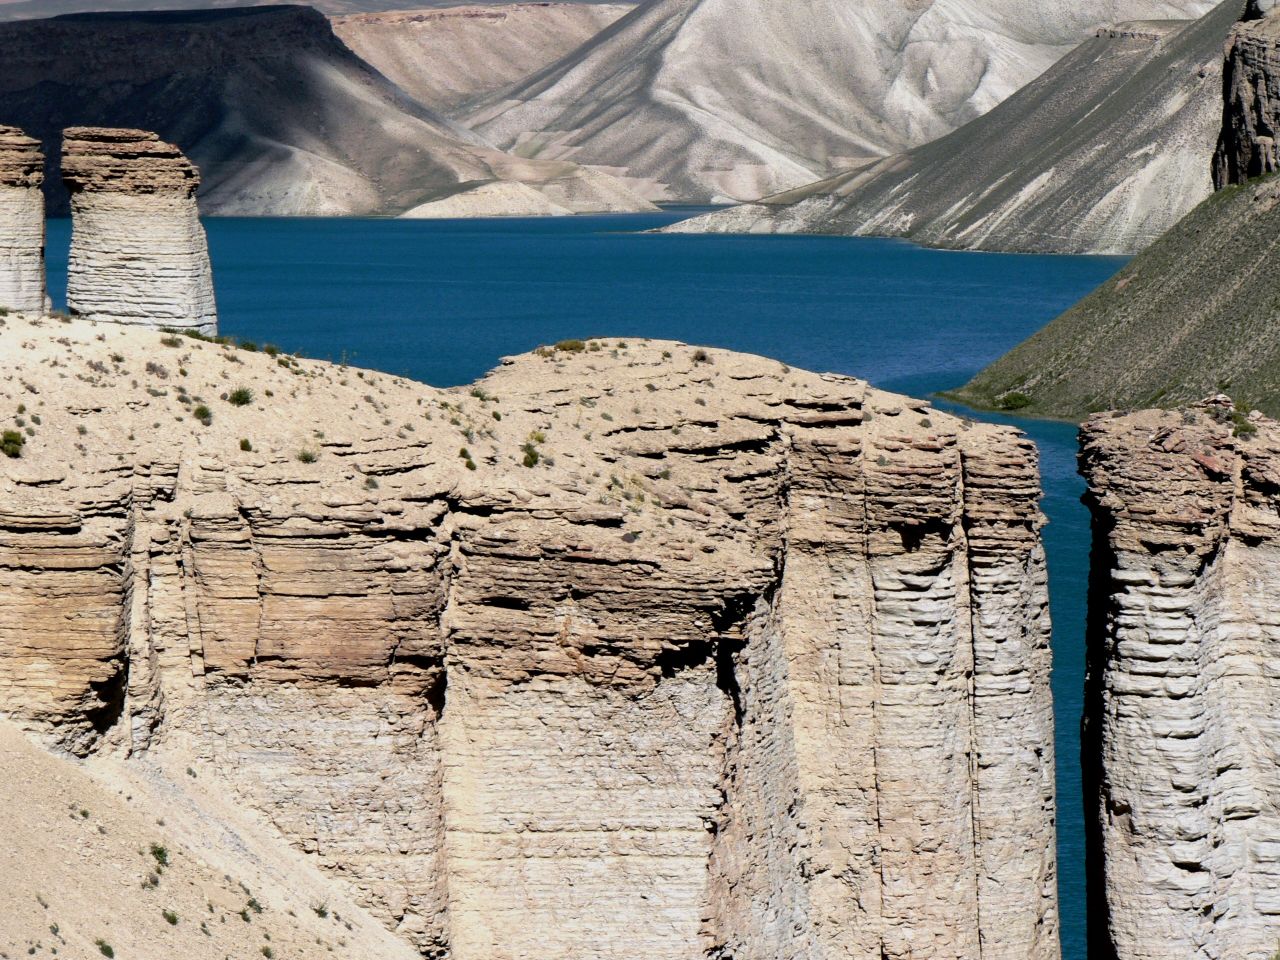 If there's one destination guaranteed to upset your parents, it's Afghanistan. Yet some intrepid over-landers occasionally travel down the Bamiyan Road to visit this chain of six mountain-rimmed lakes perched high in the Hindu Kush.